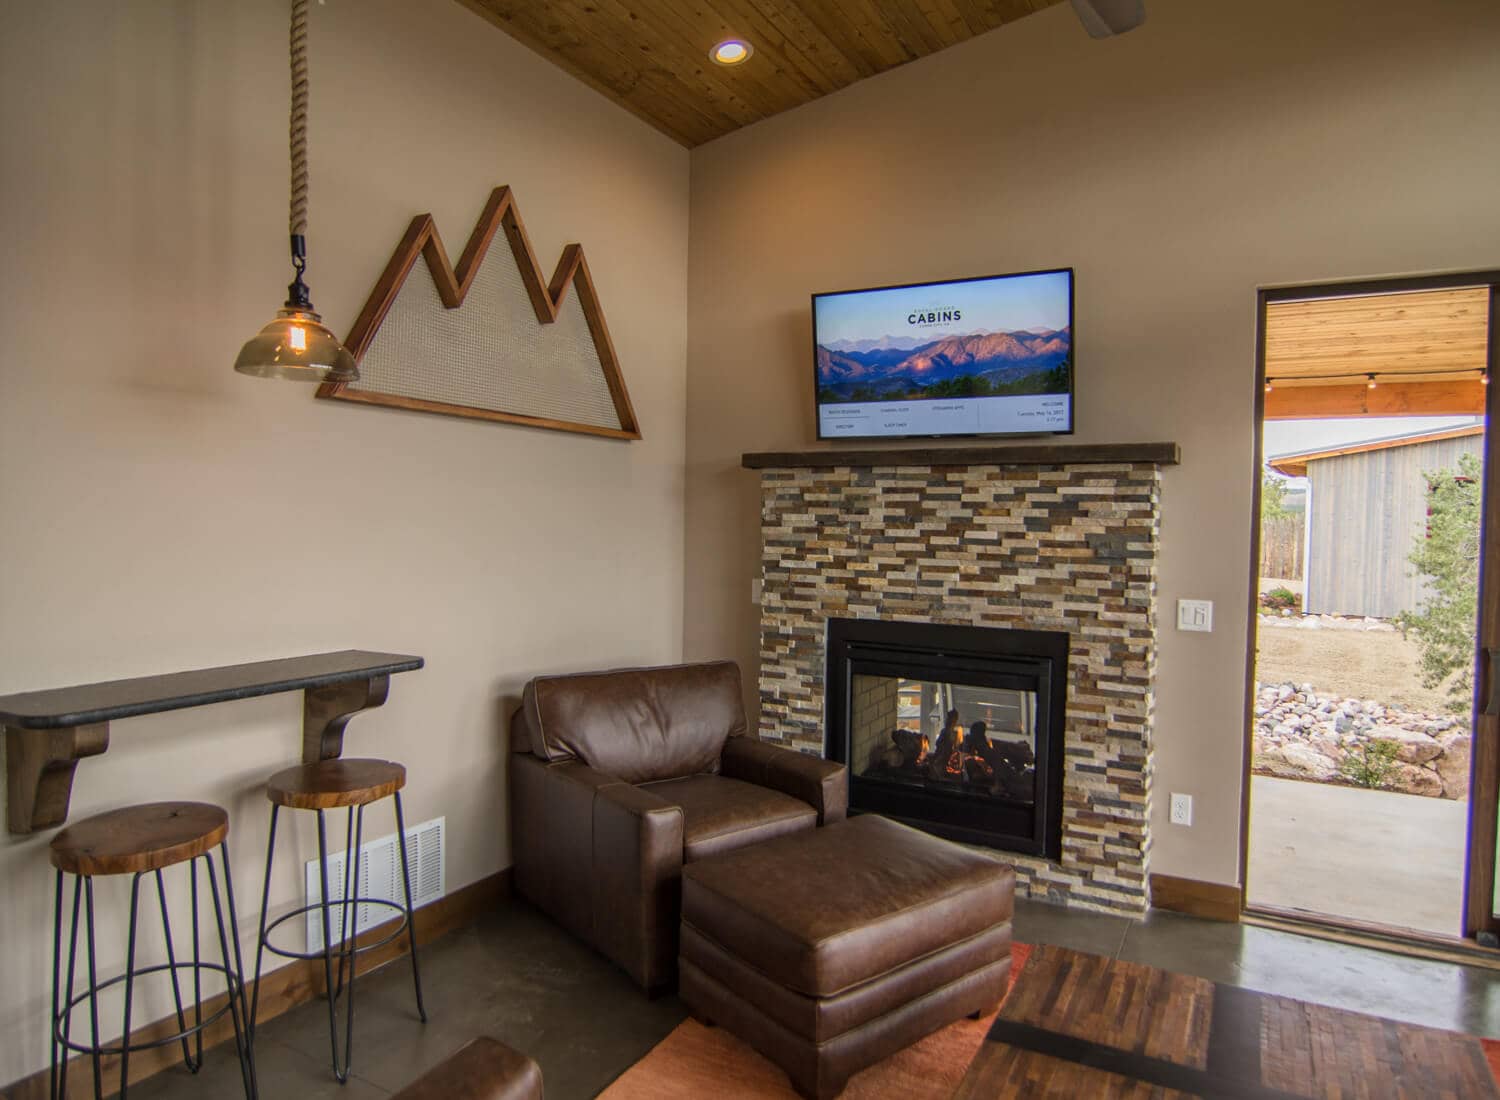 Single King Cabin fireplace and living room